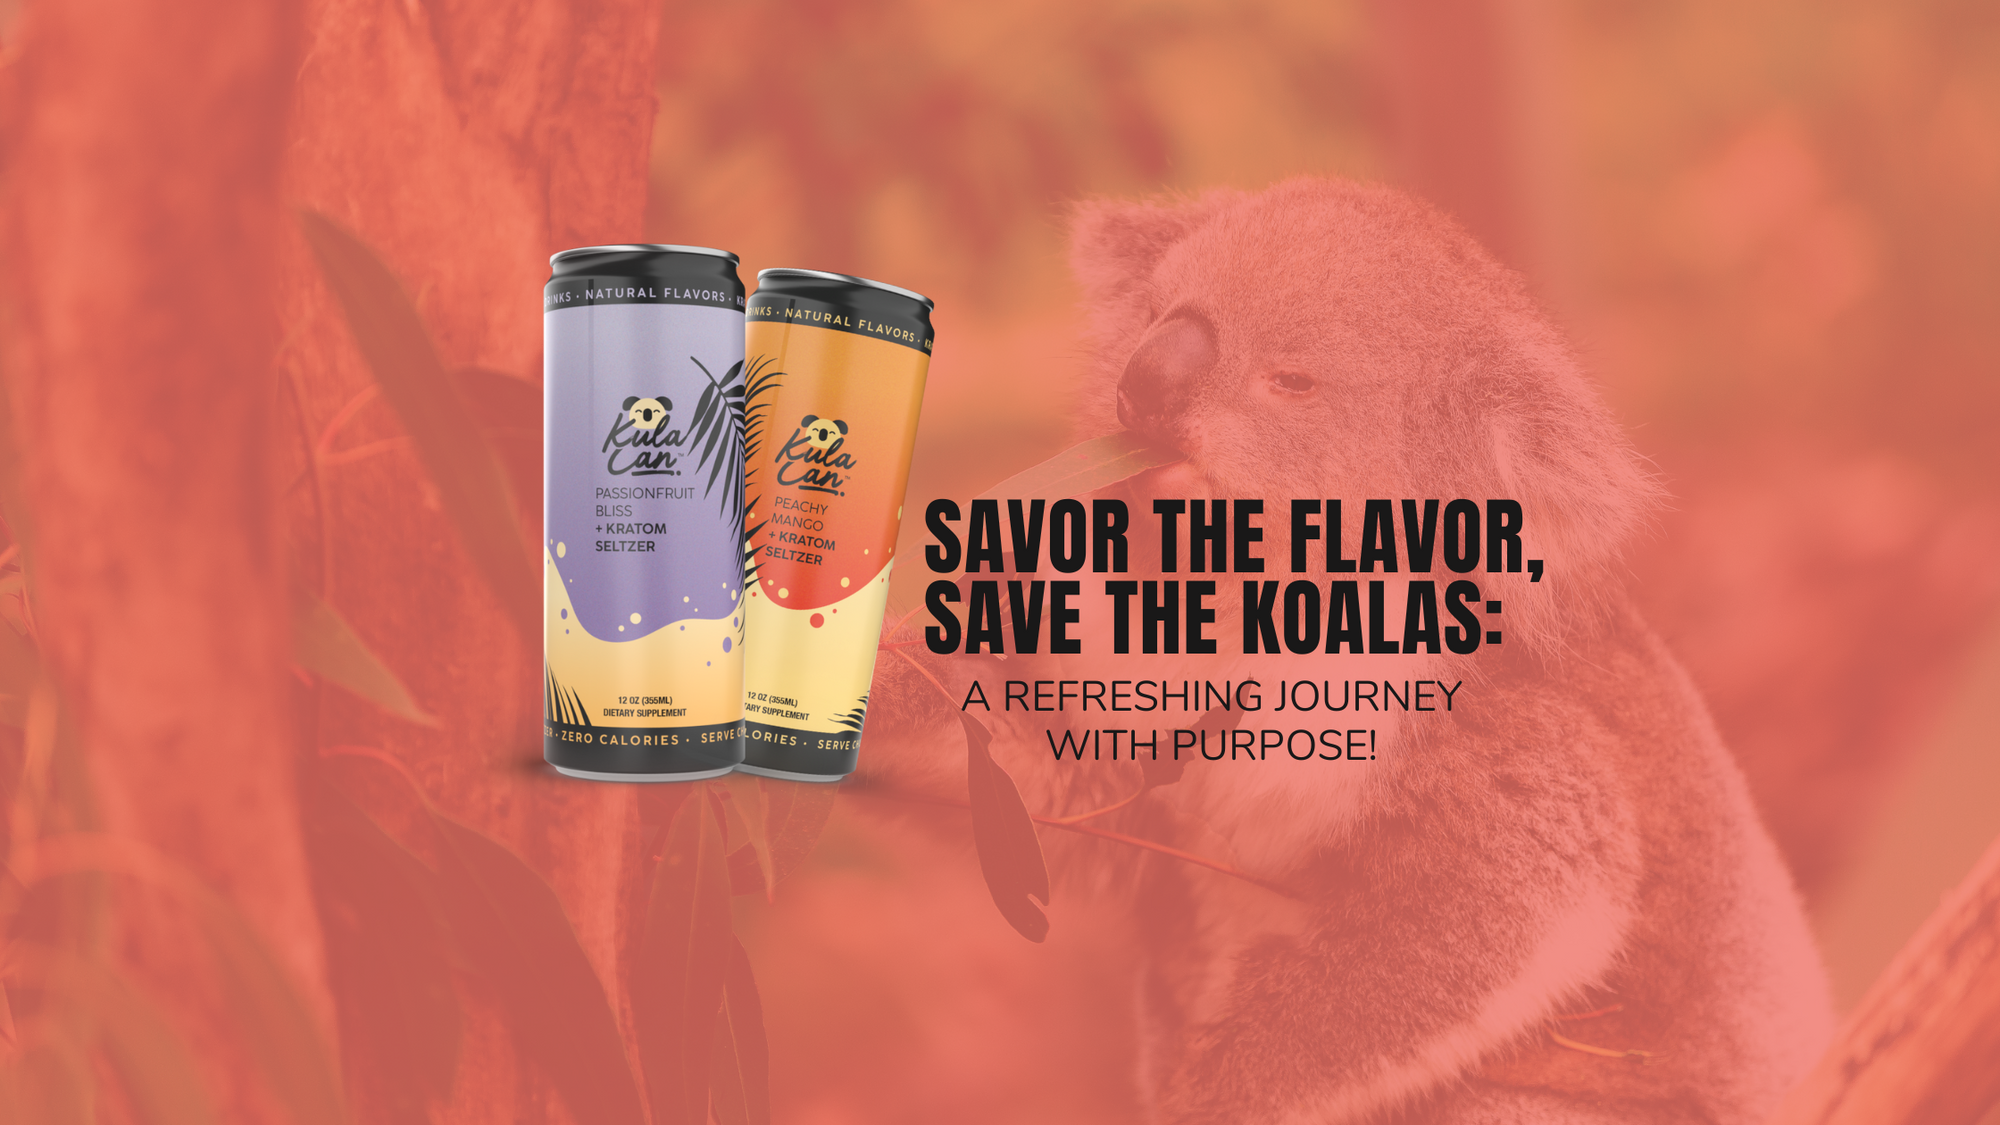 Savor the Flavor, Save the Koalas: A Refreshing Journey with Purpose!